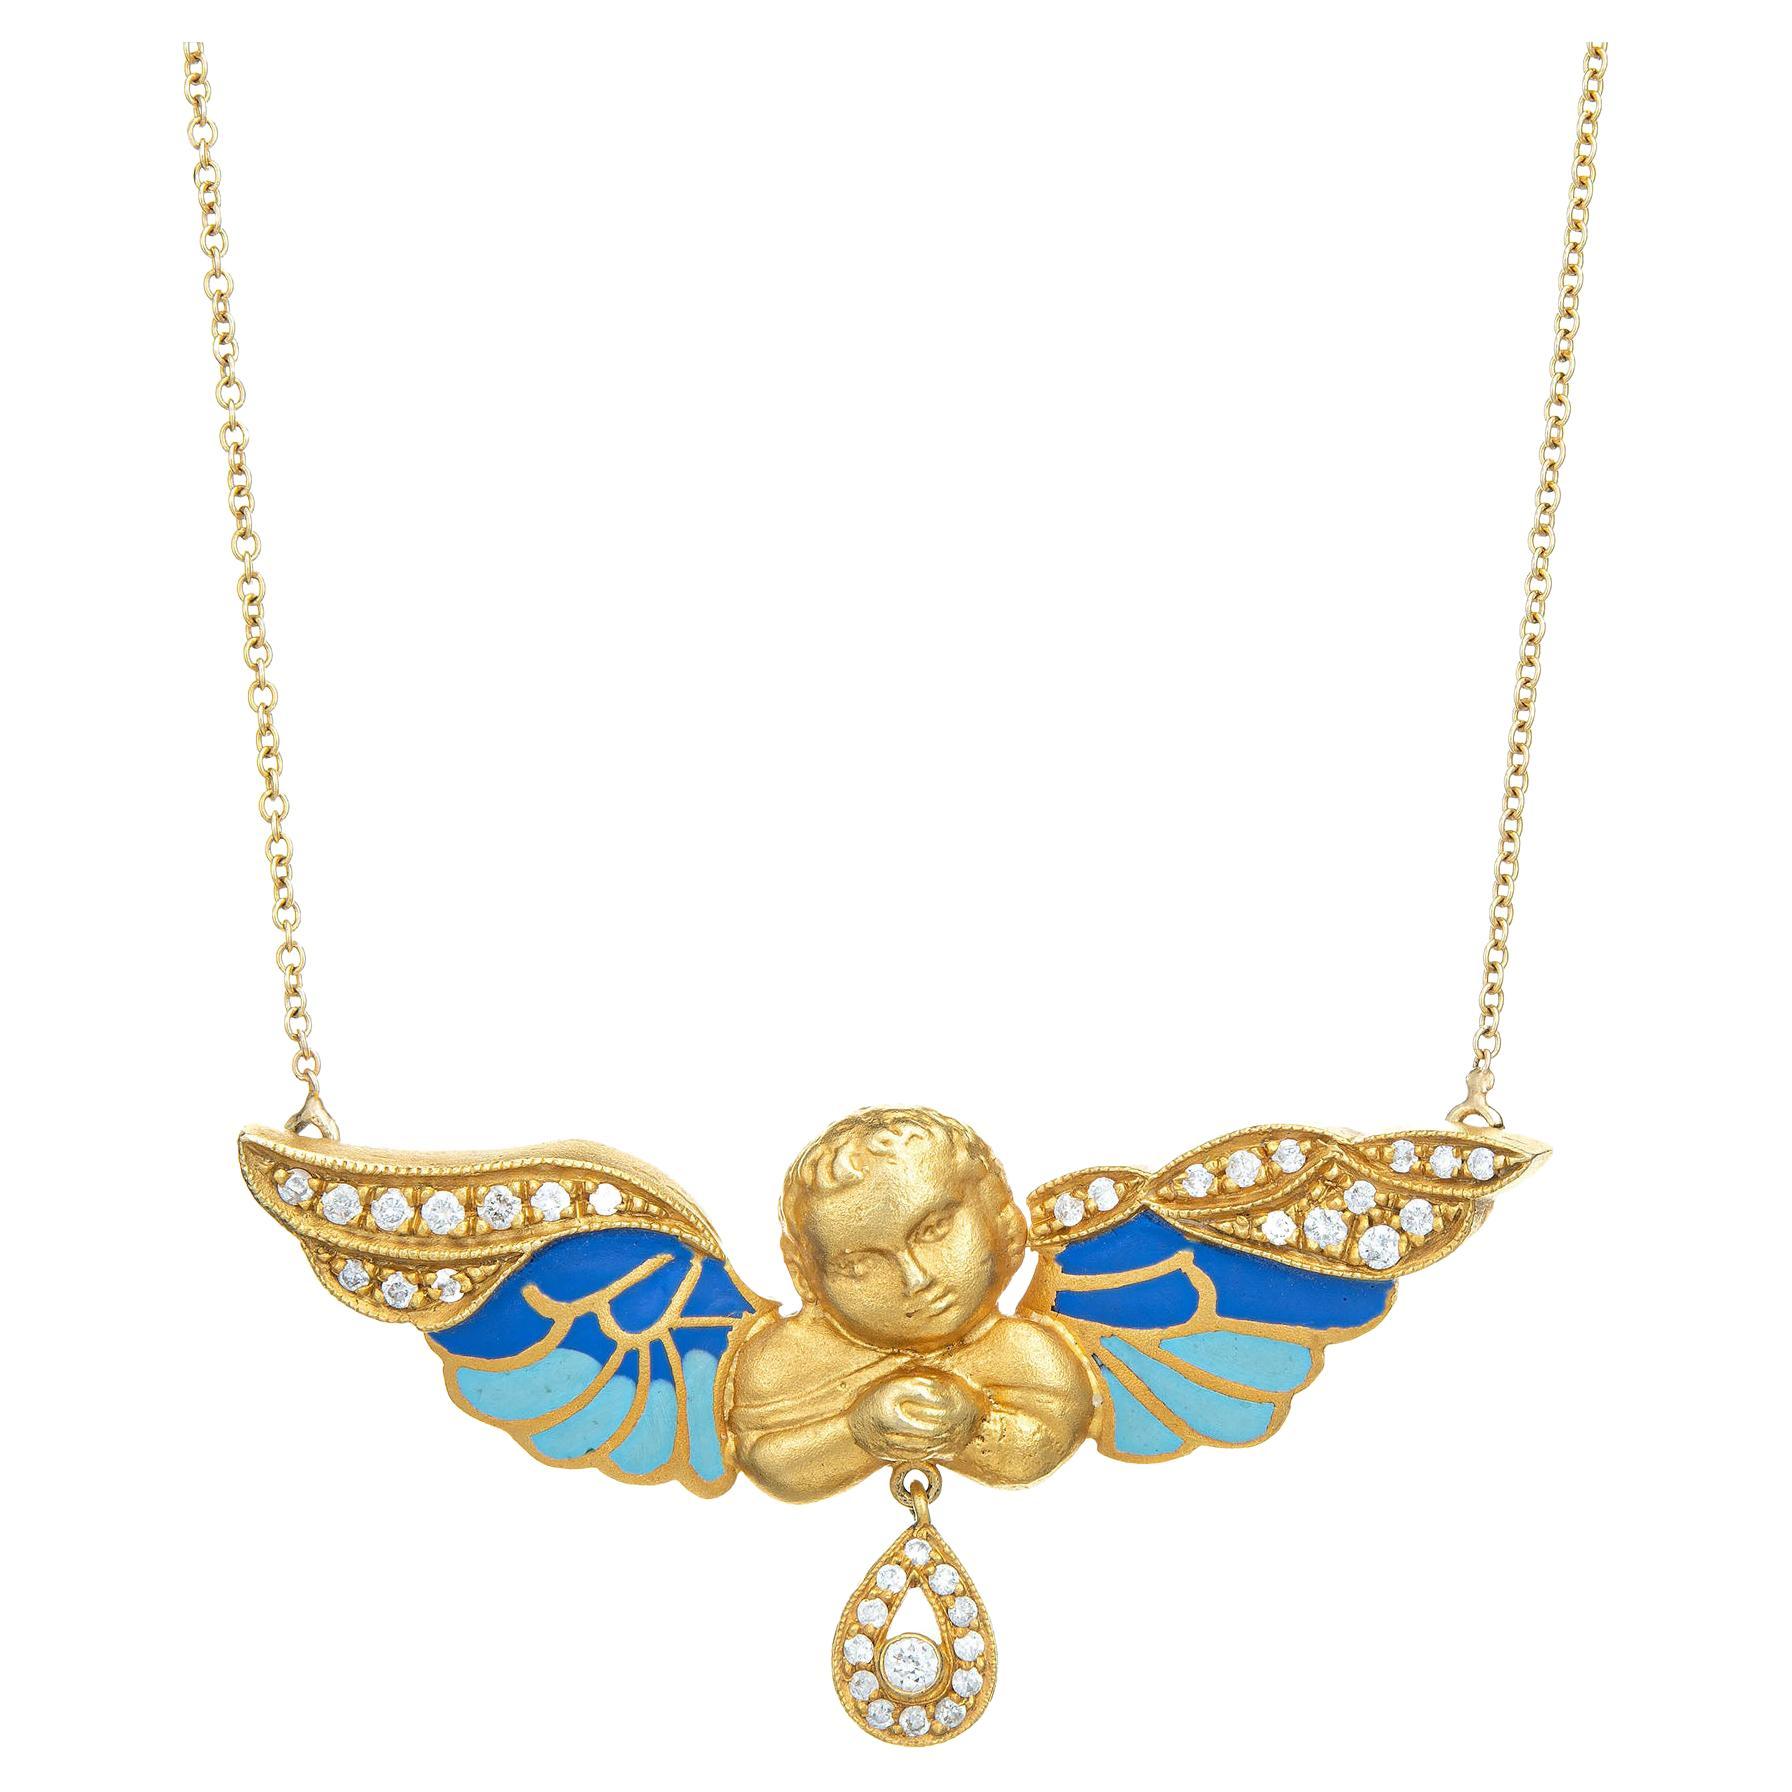 Winged Angel Necklace Diamond Enamel Vintage 14k Yellow Gold Chain Jewelry For Sale